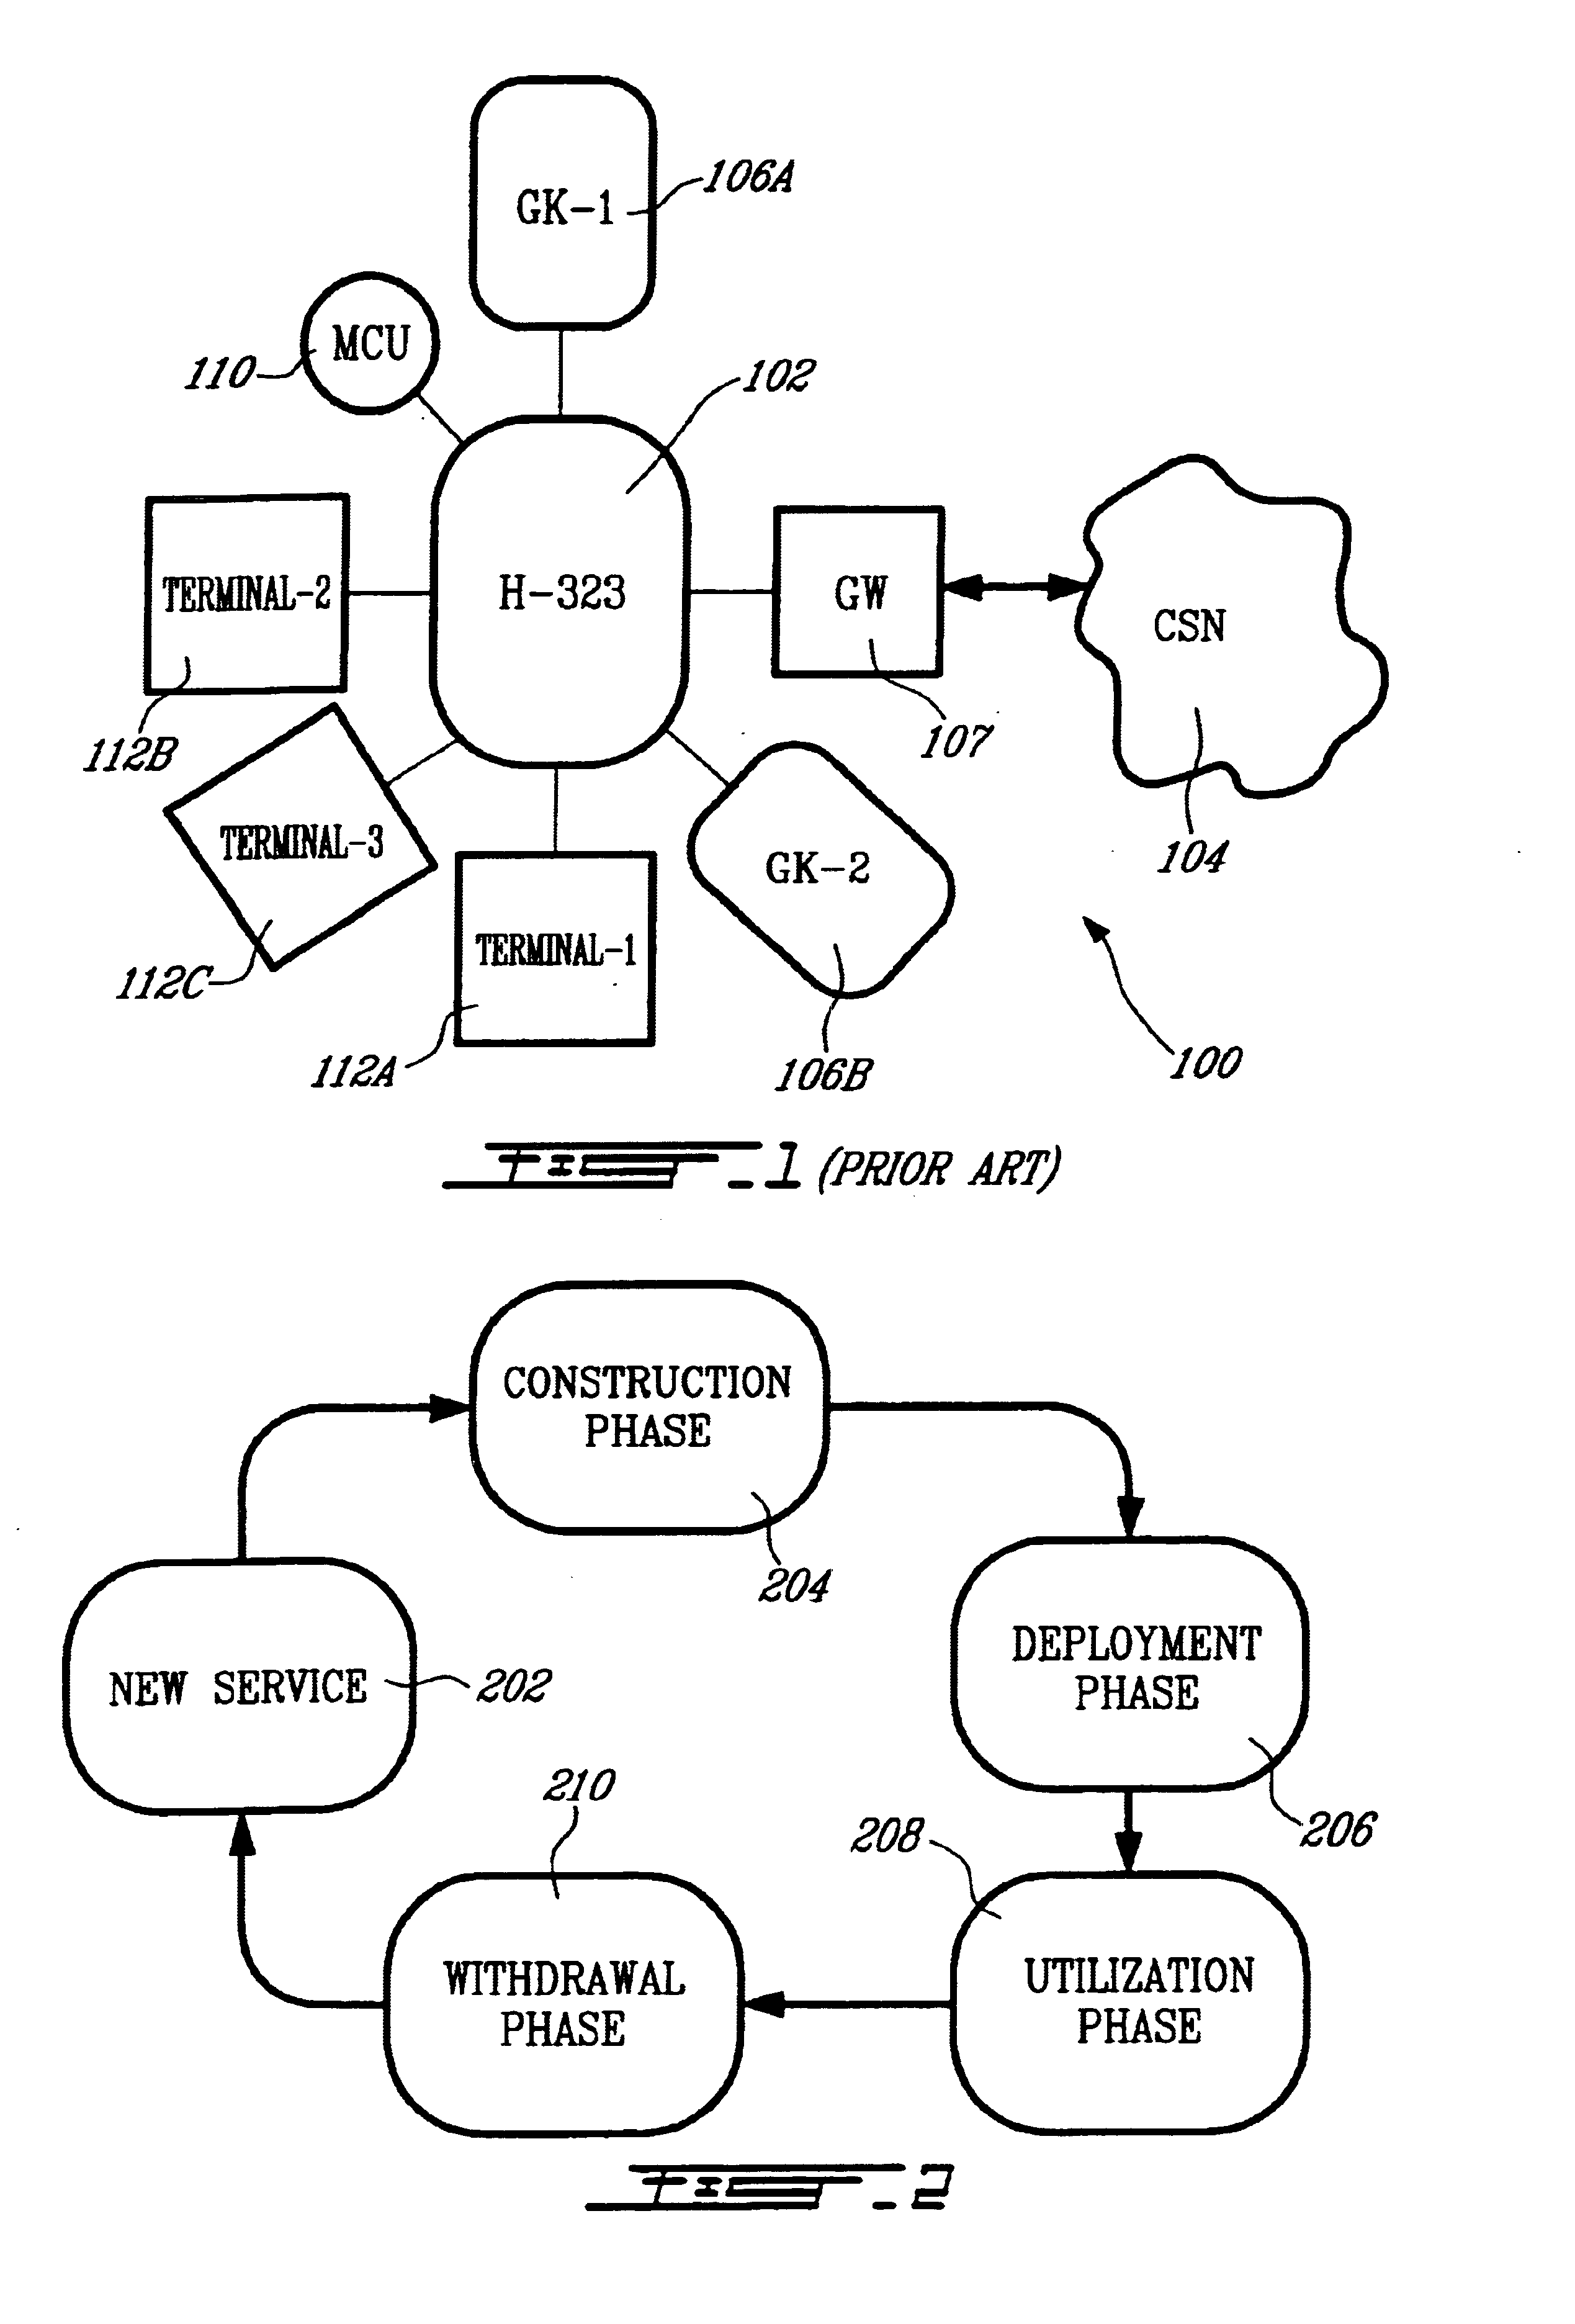 System and method for providing supplementary services (SS) in an integrated telecommunications network